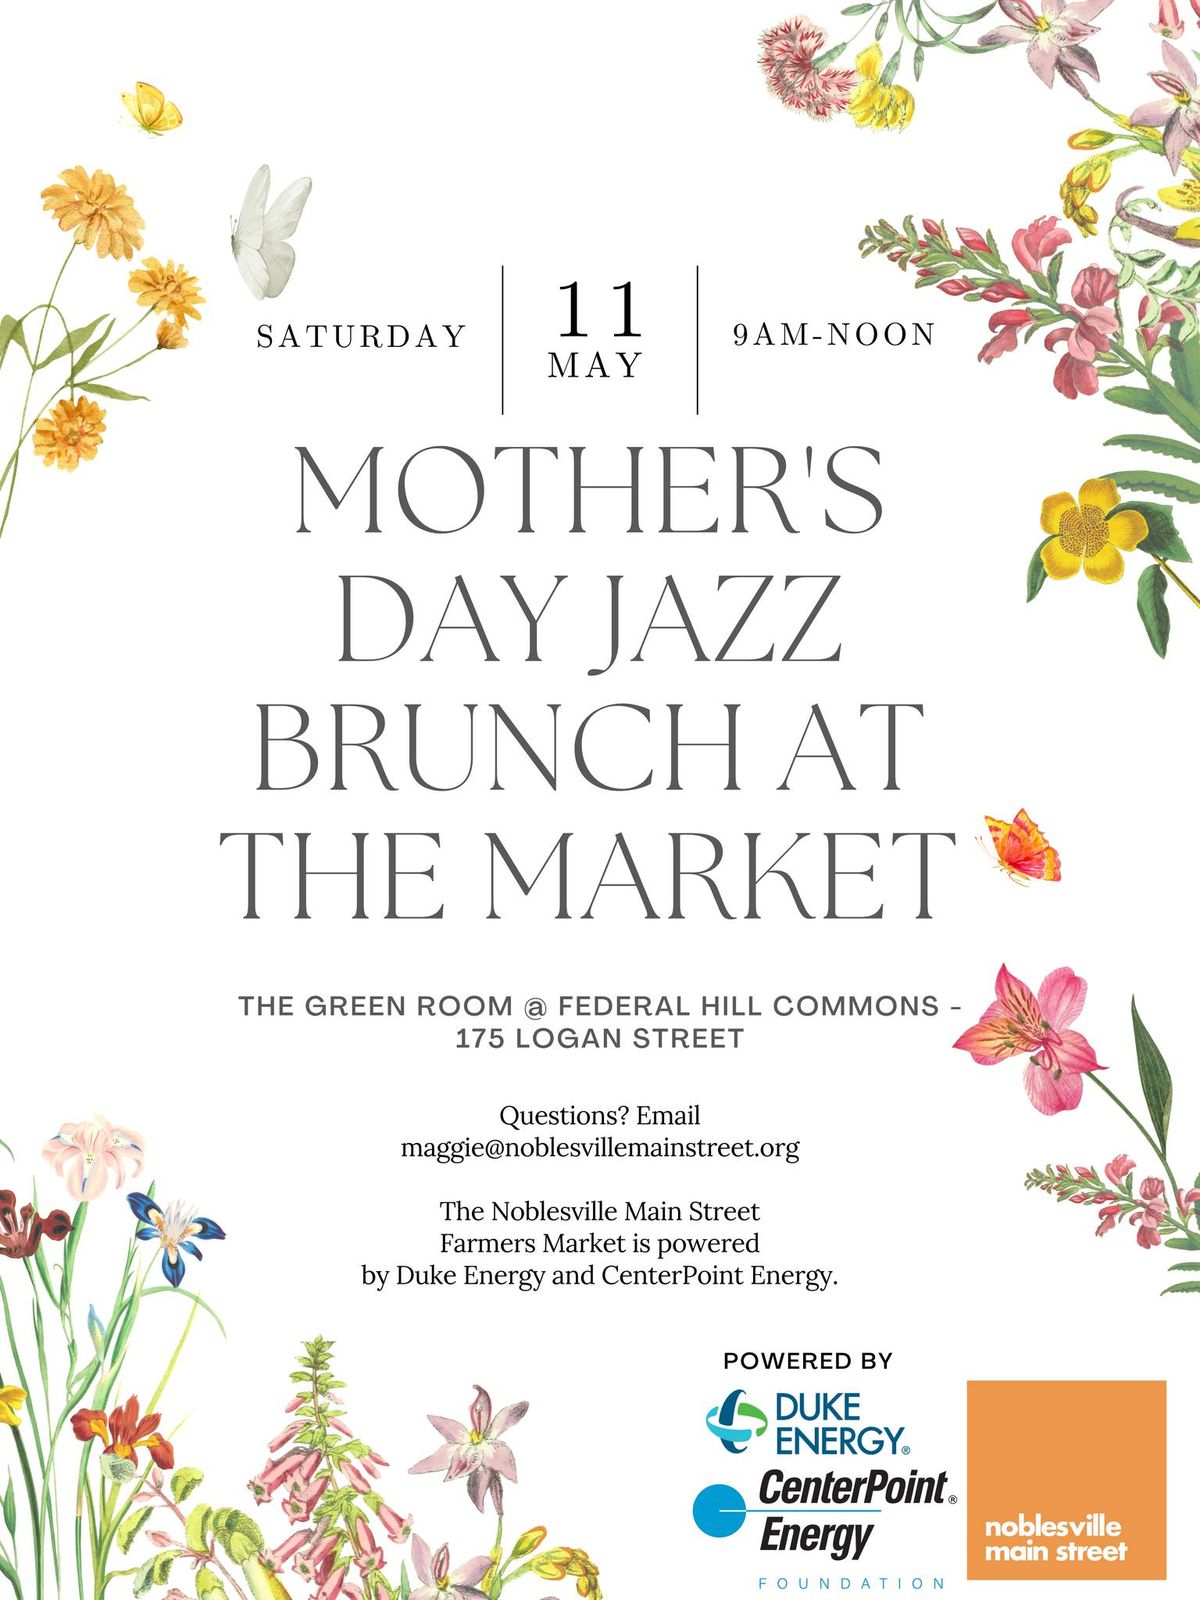 Mother's Day Jazz Brunch at the Market